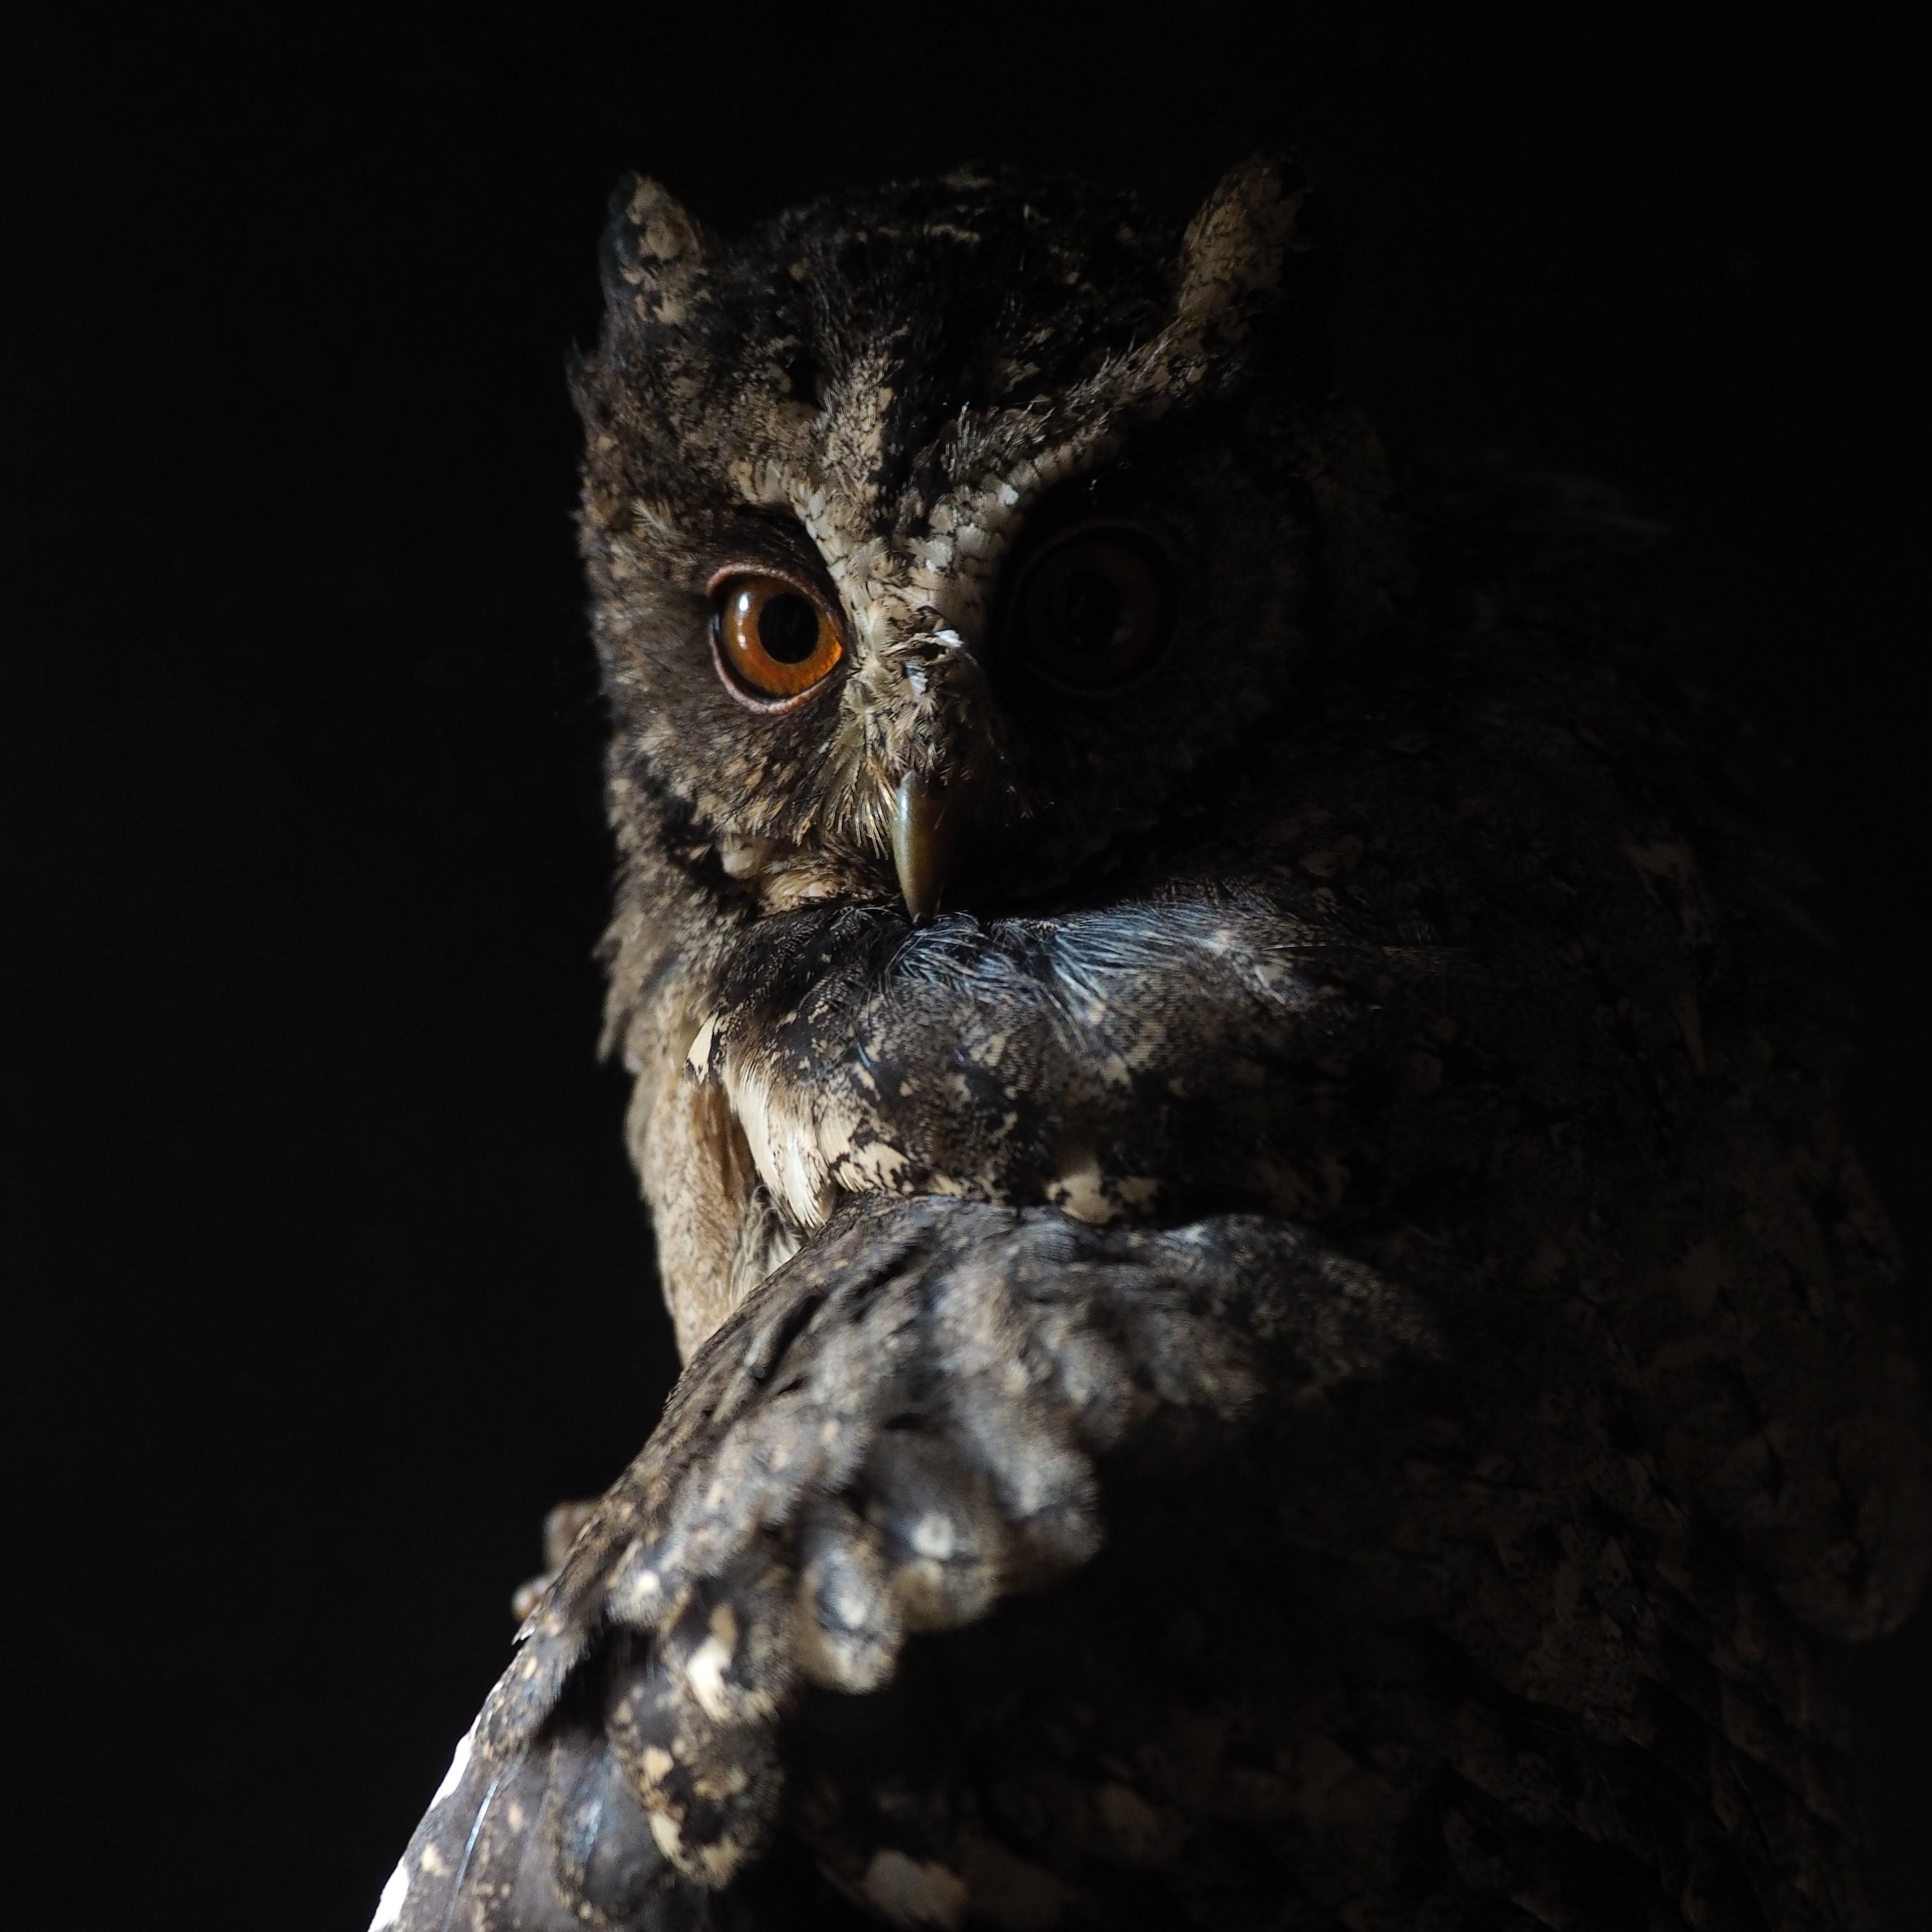 A screech owl with half its face in shadow